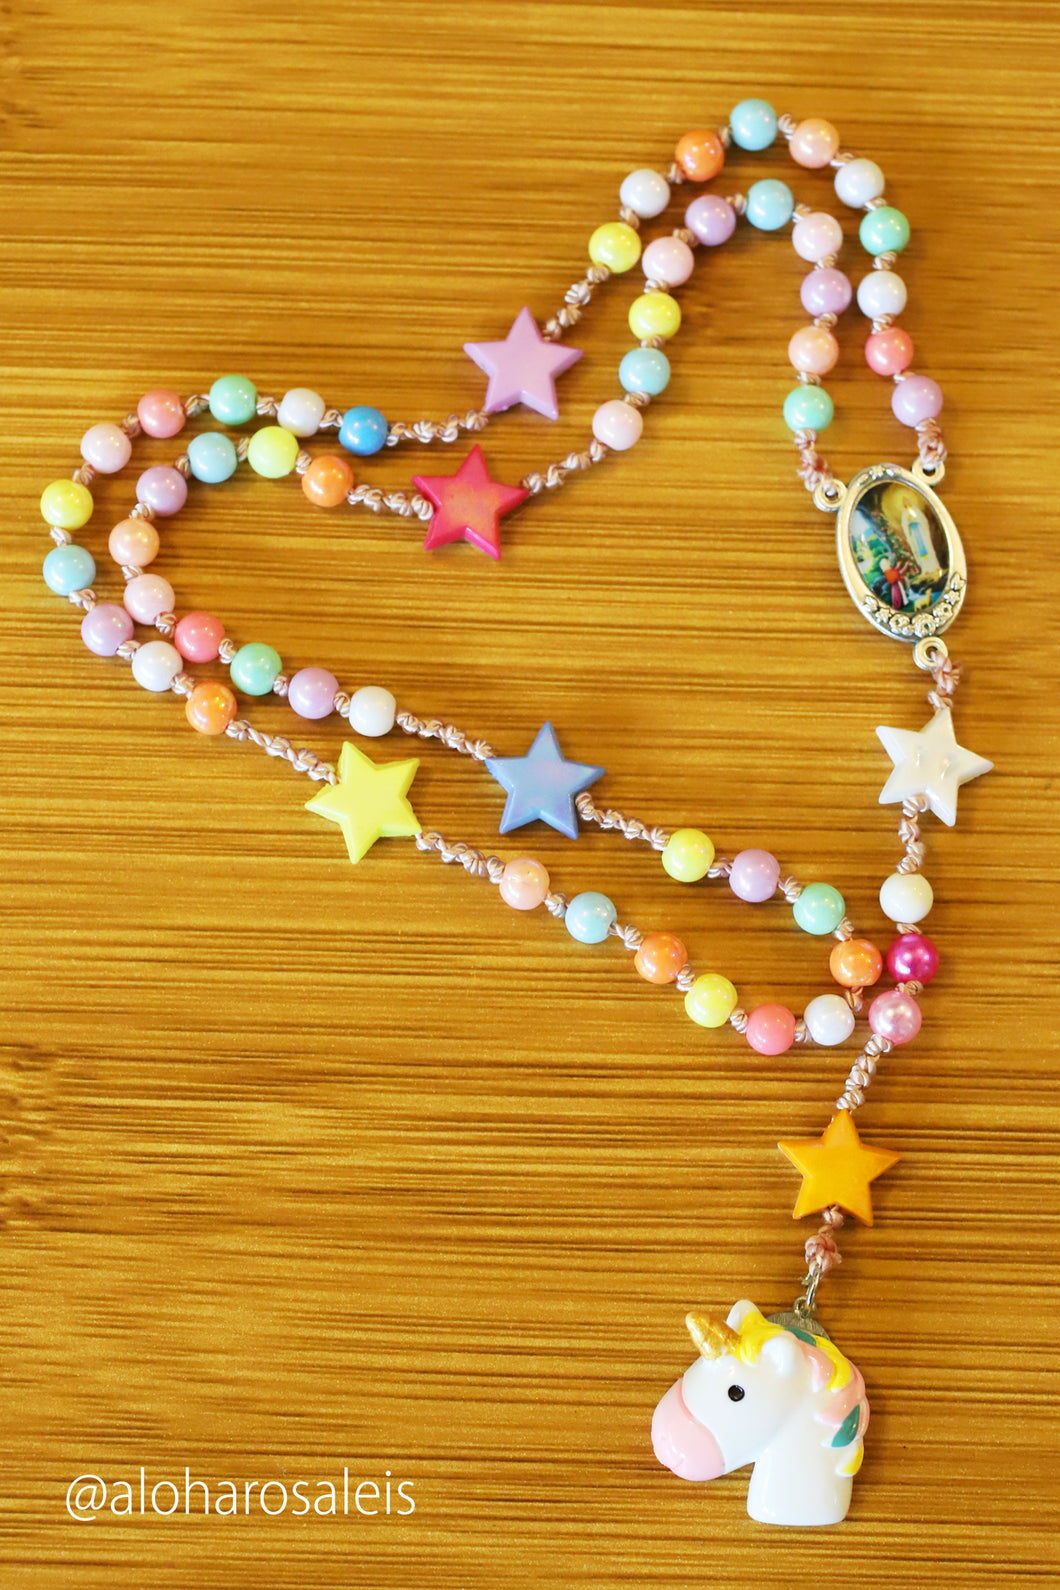 Divine Mother says pray and play! Pastel plastic colored 6mm beads and stars makes this rosary very light and bright. Hand knotted with a touch of unicorn love.